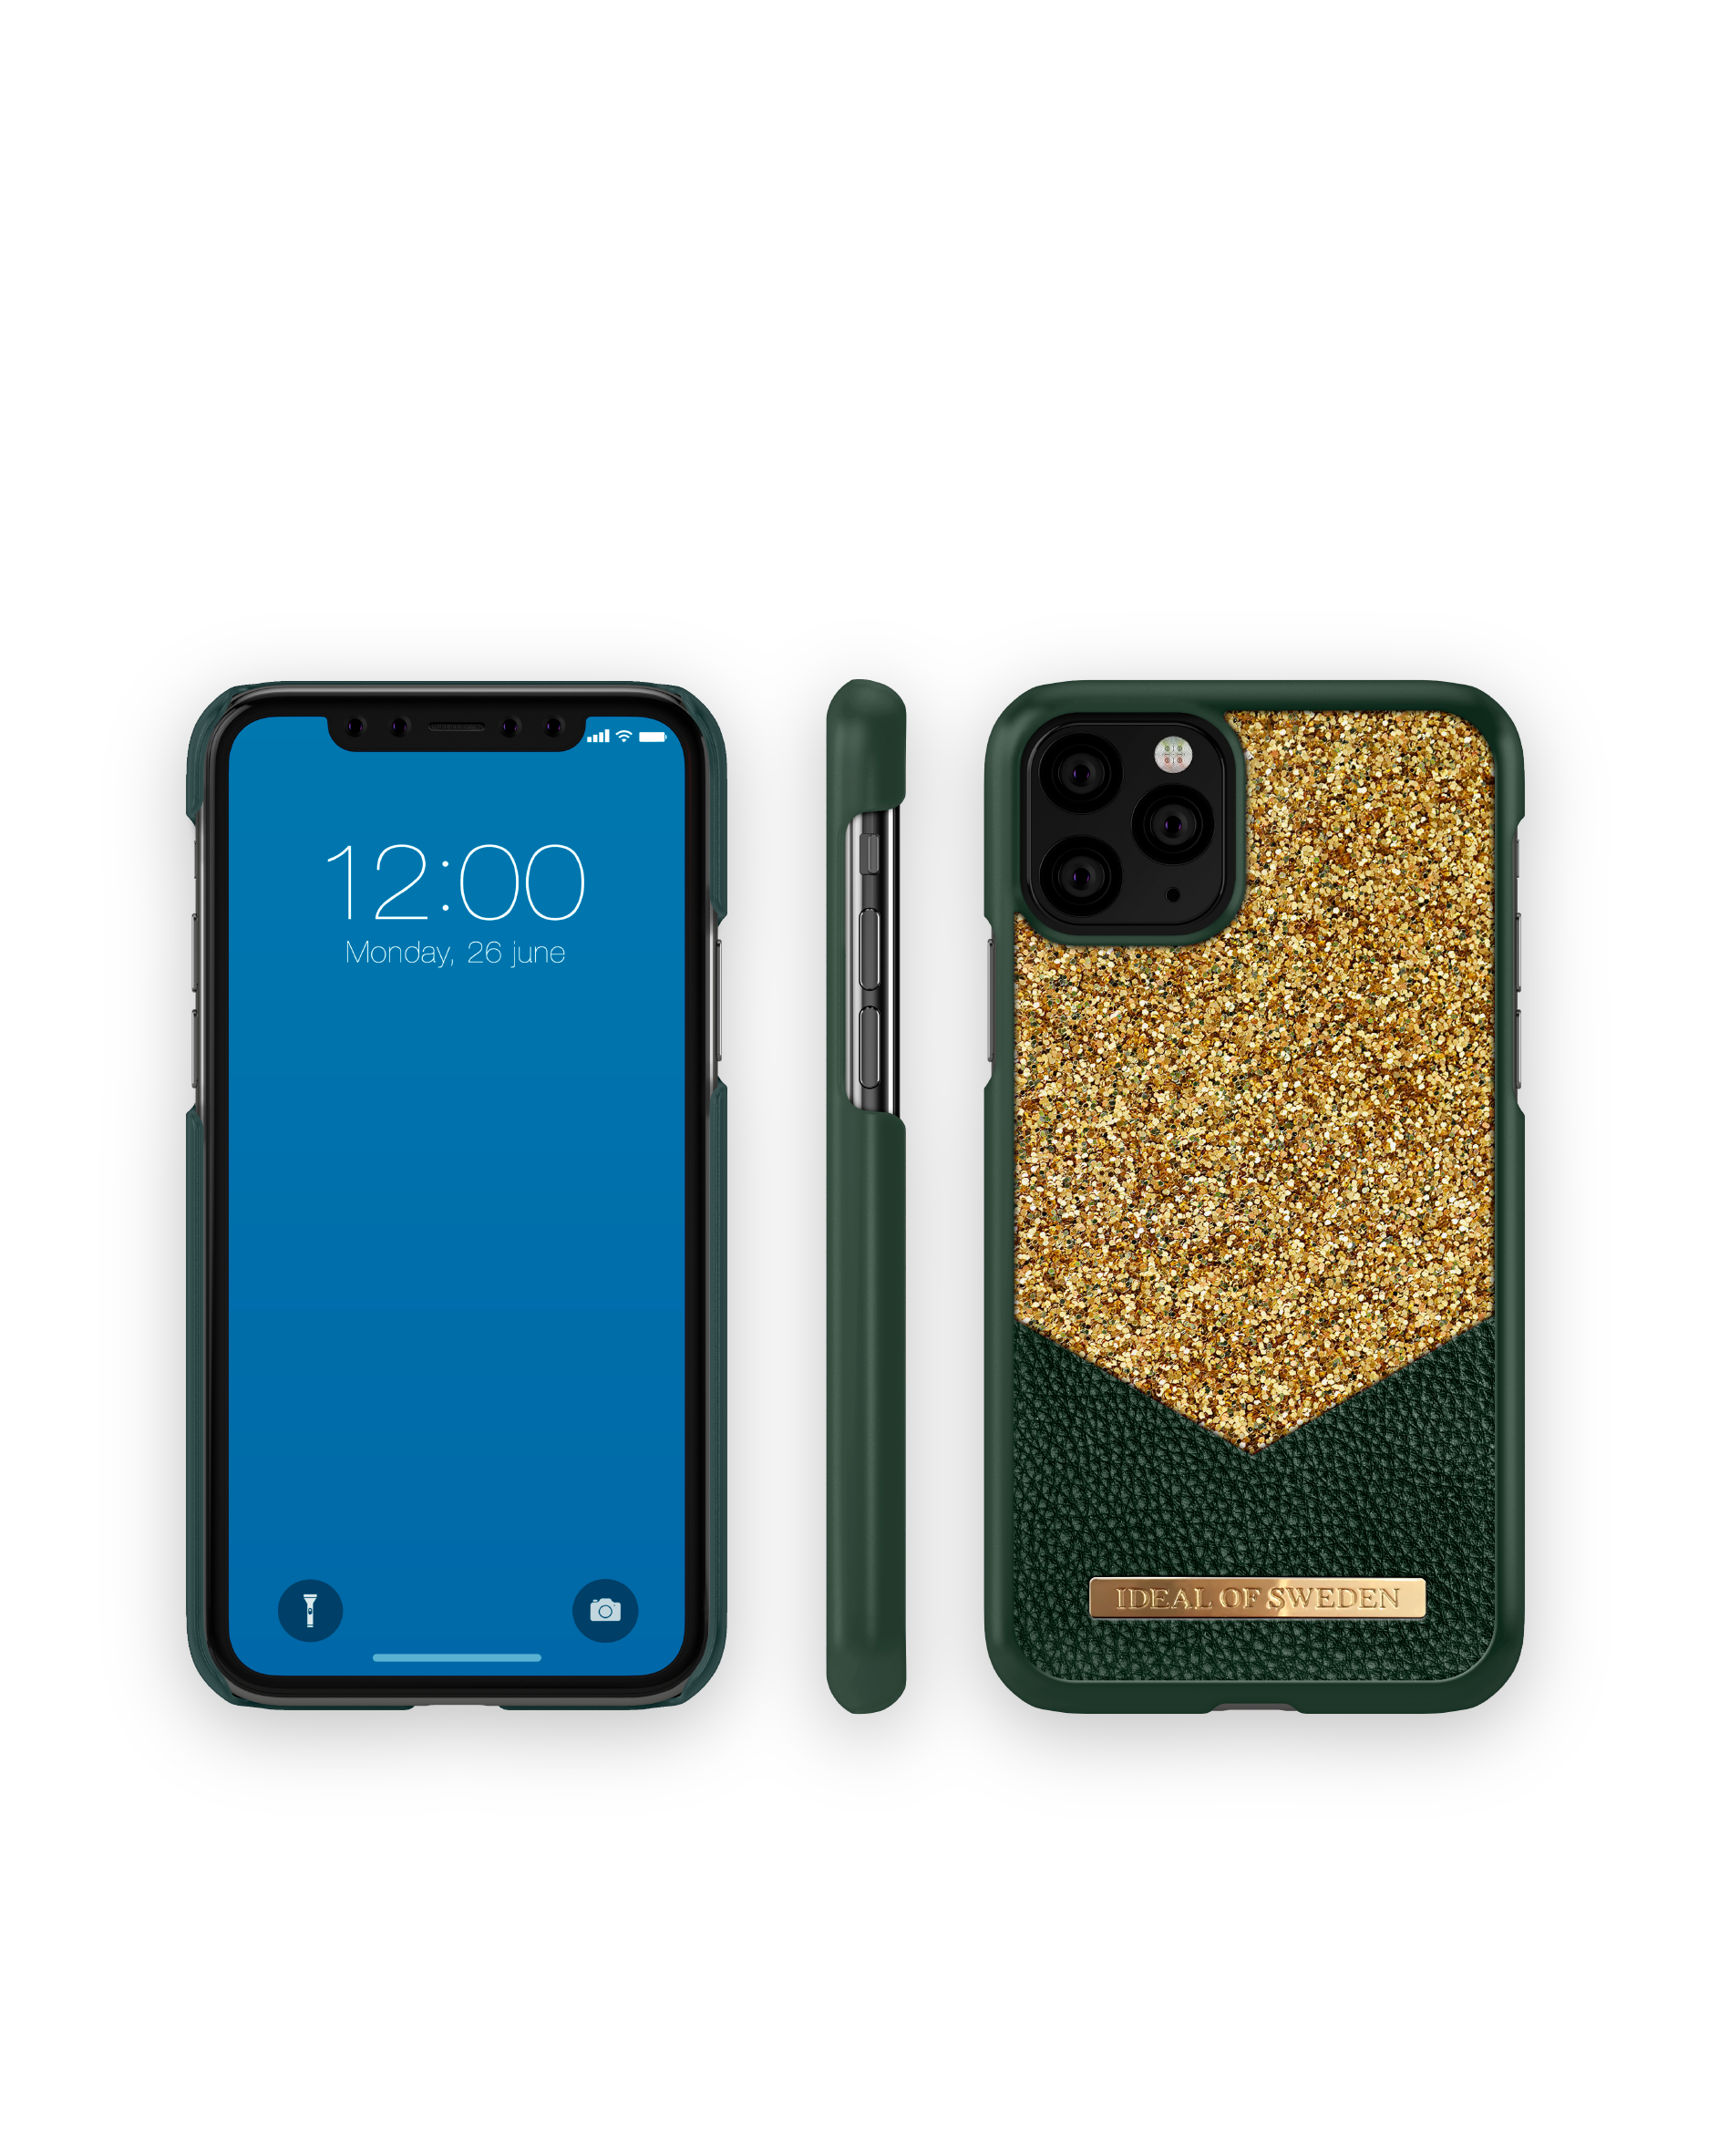 Pro, iPhone IDFCGC-I1958-176, SWEDEN iPhone Emerald X, Apple Apple Backcover, Apple, Apple iPhone 11 XS, IDEAL OF